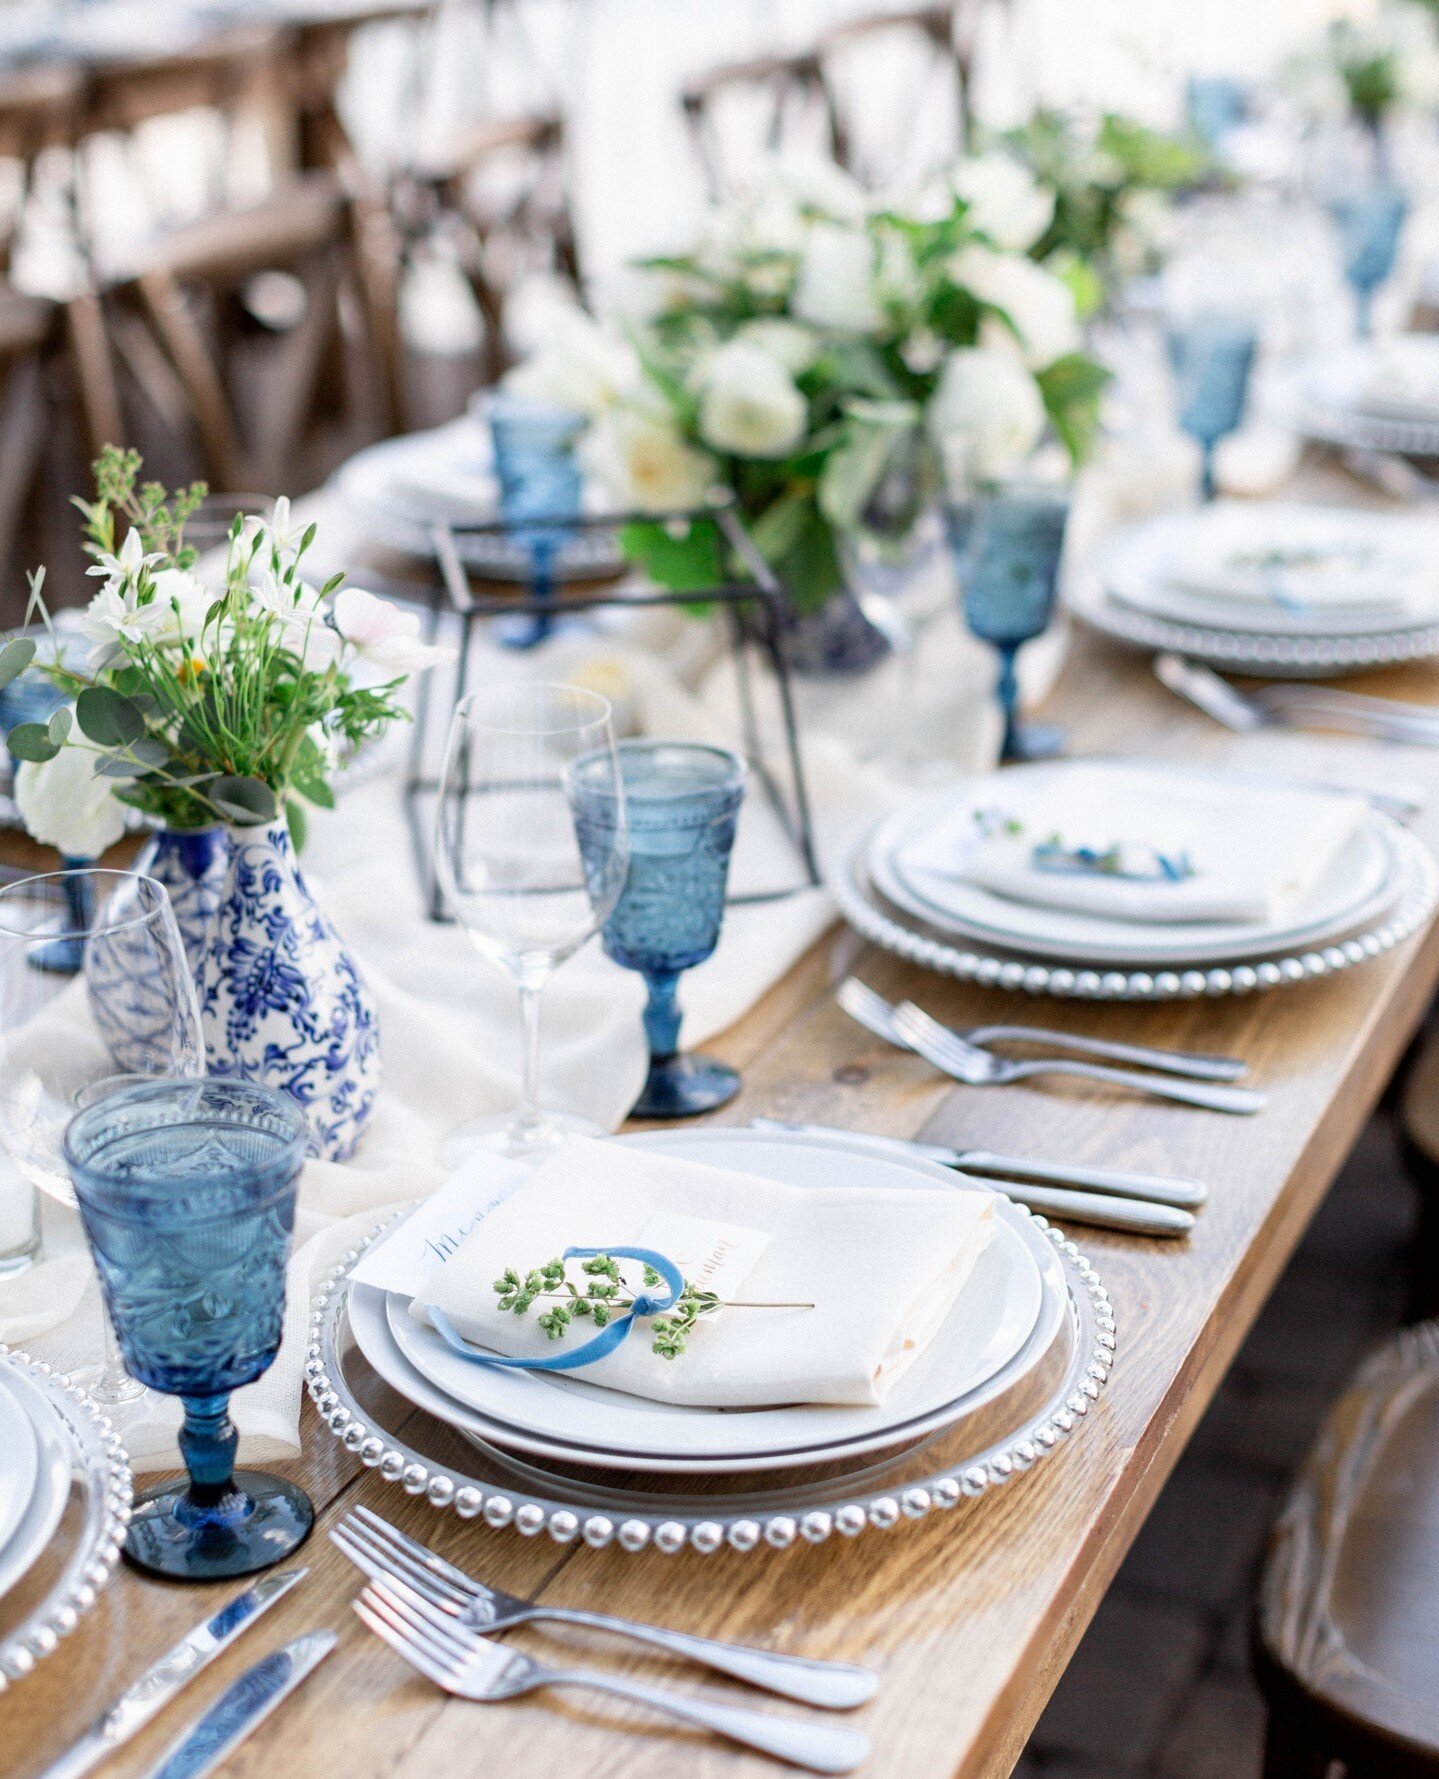 We can't help but swoon over the mesmerizing pops of blue that bring this tablescape to life. Every detail is perfectly executed, and we're thrilled to share it with you. Stay tuned for more stunning wedding inspiration from our talented team! 💙✨